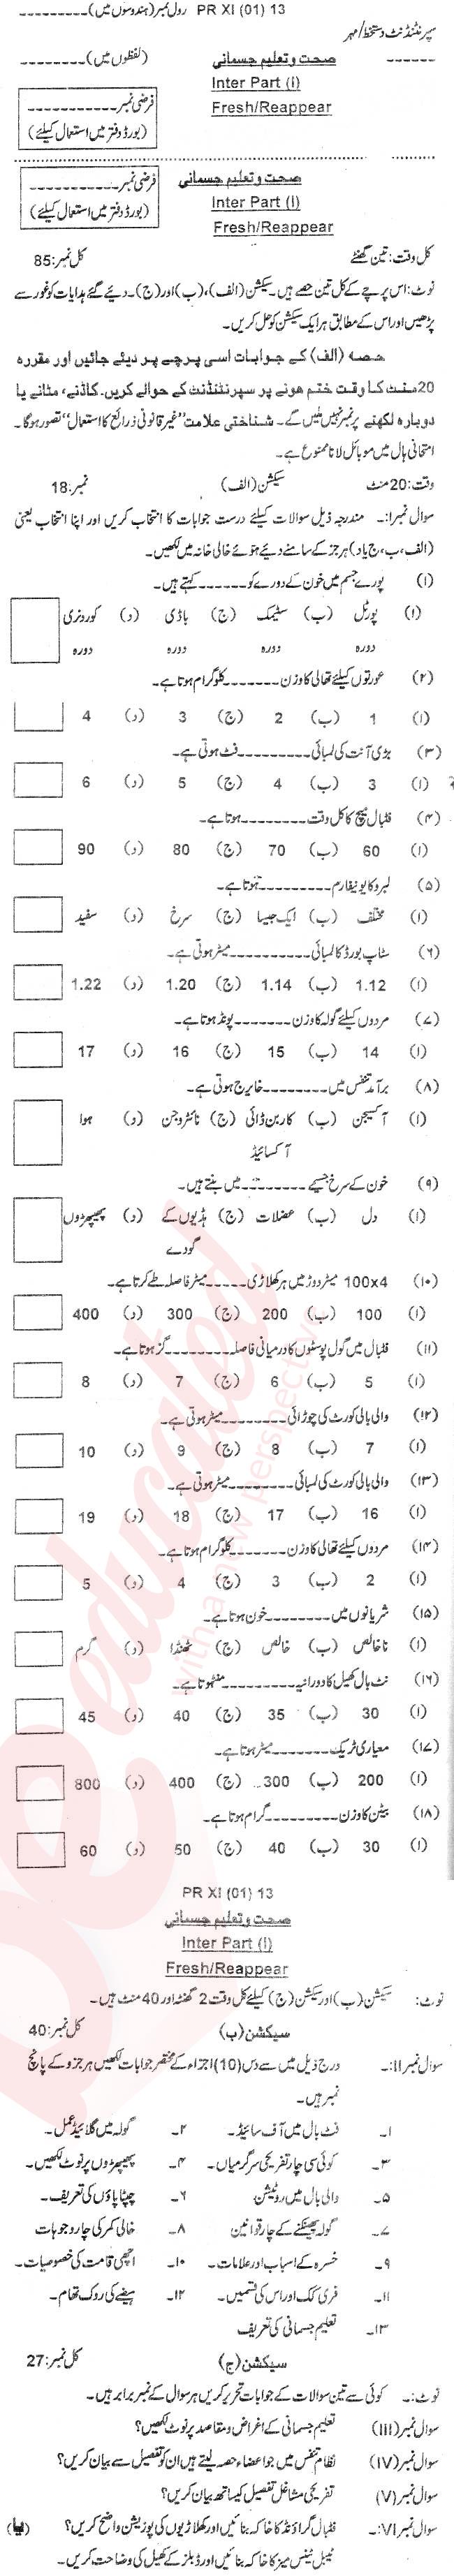 Health and Physical Education FA Part 1 Past Paper Group 1 BISE Bannu 2013